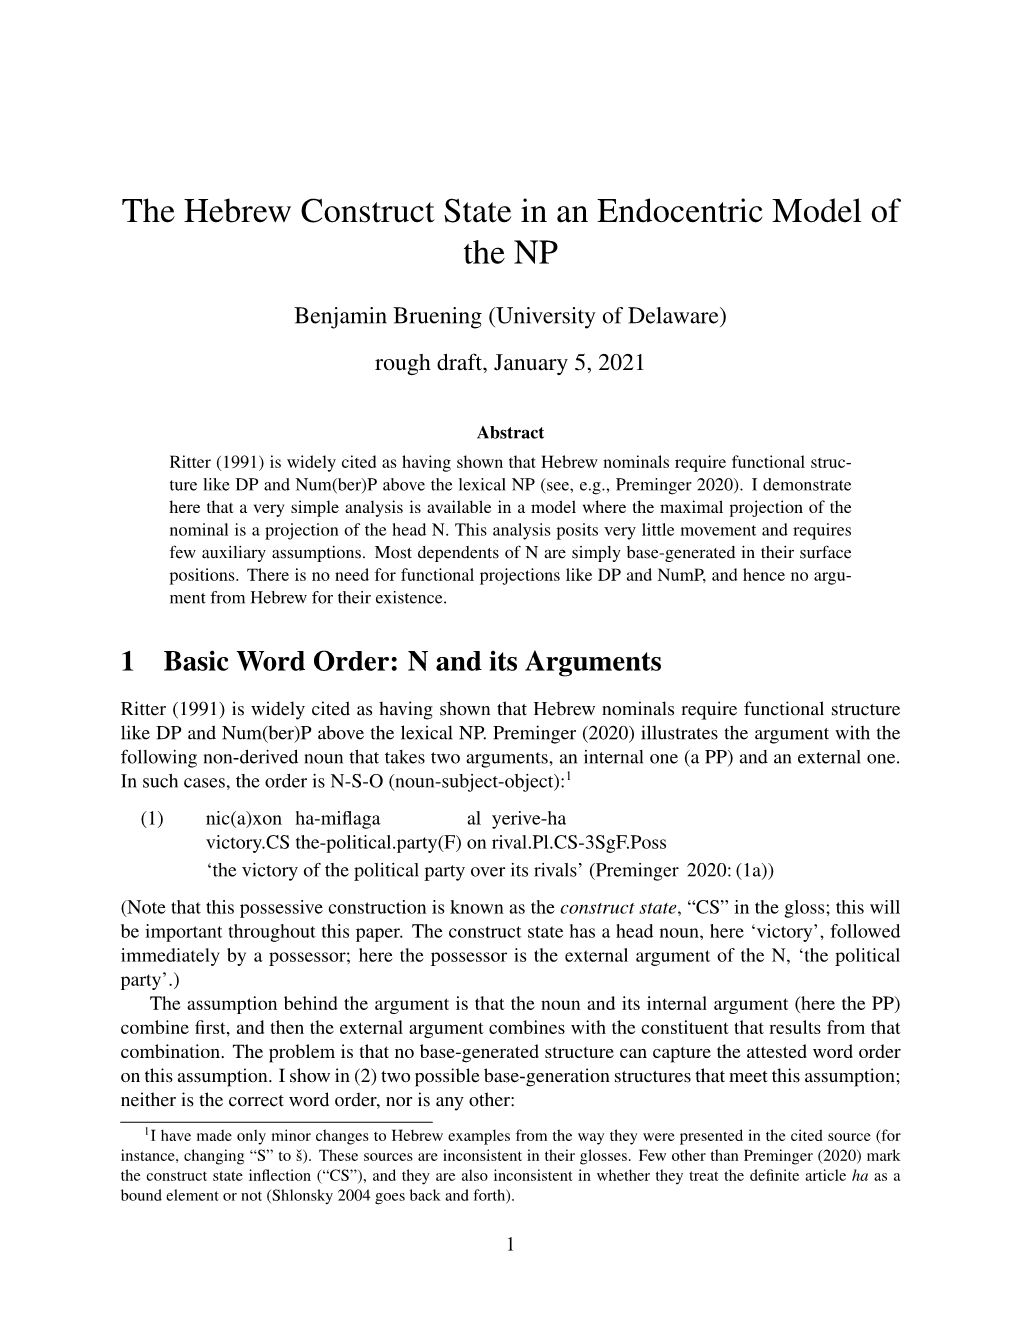 The Hebrew Construct State in an Endocentric Model of the NP